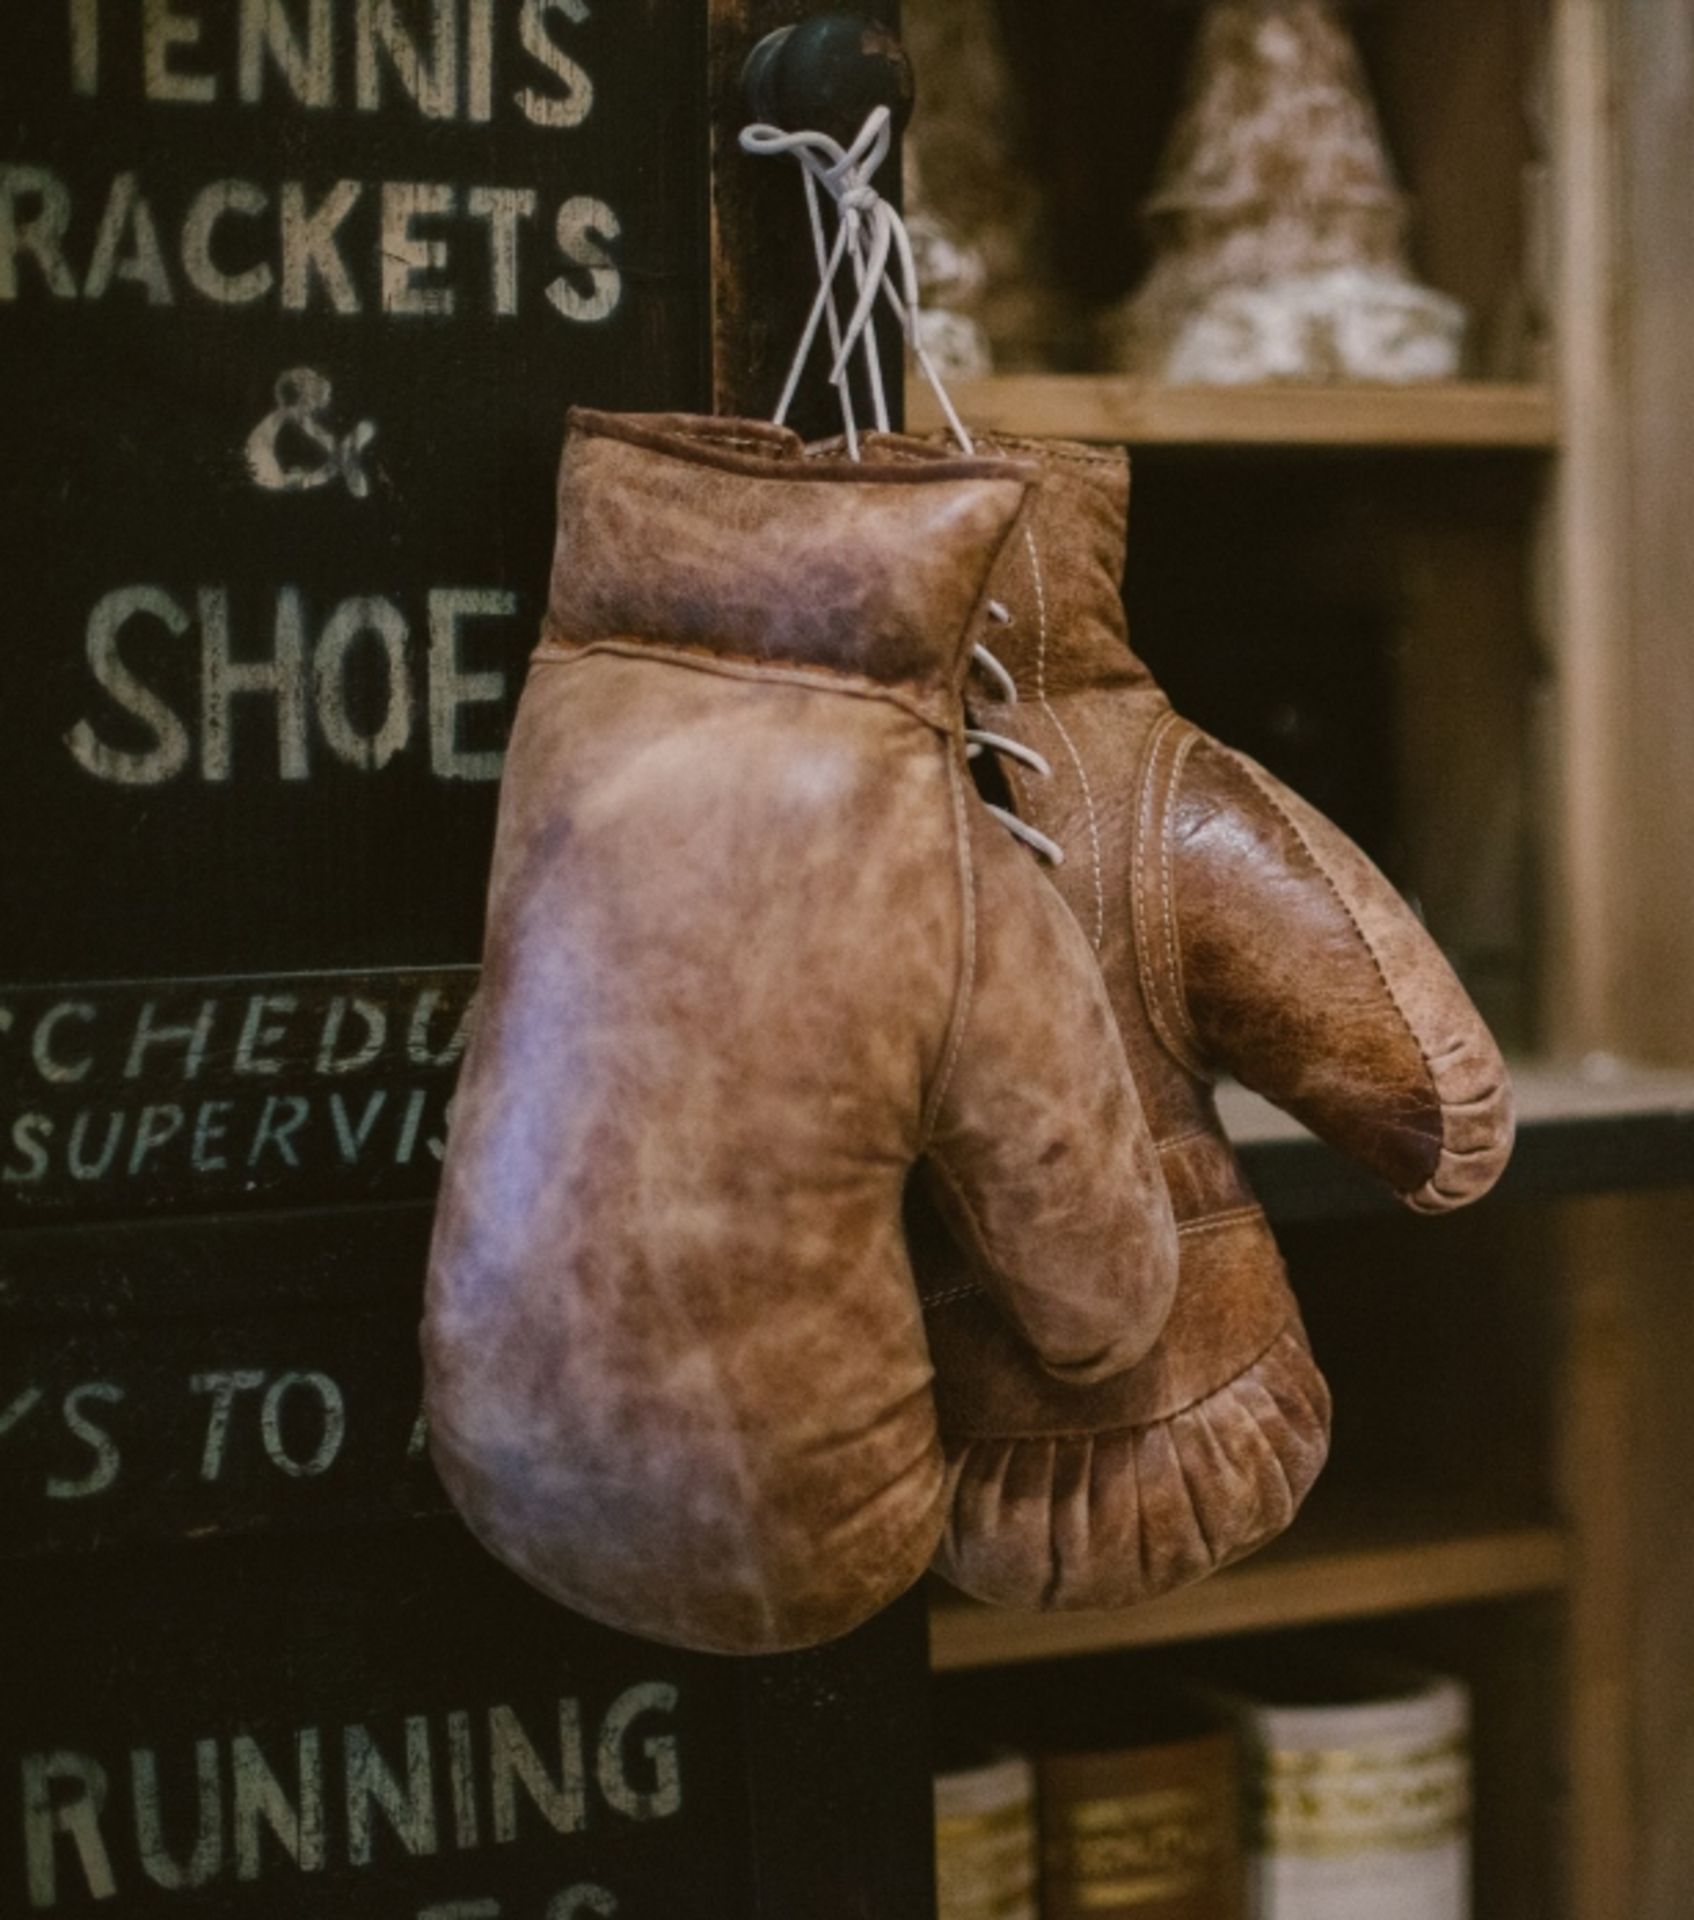 Timothy Oulton Sporting Boxing Glove – Pair Hand Stitched And Handcrafted In Burnished Vintage